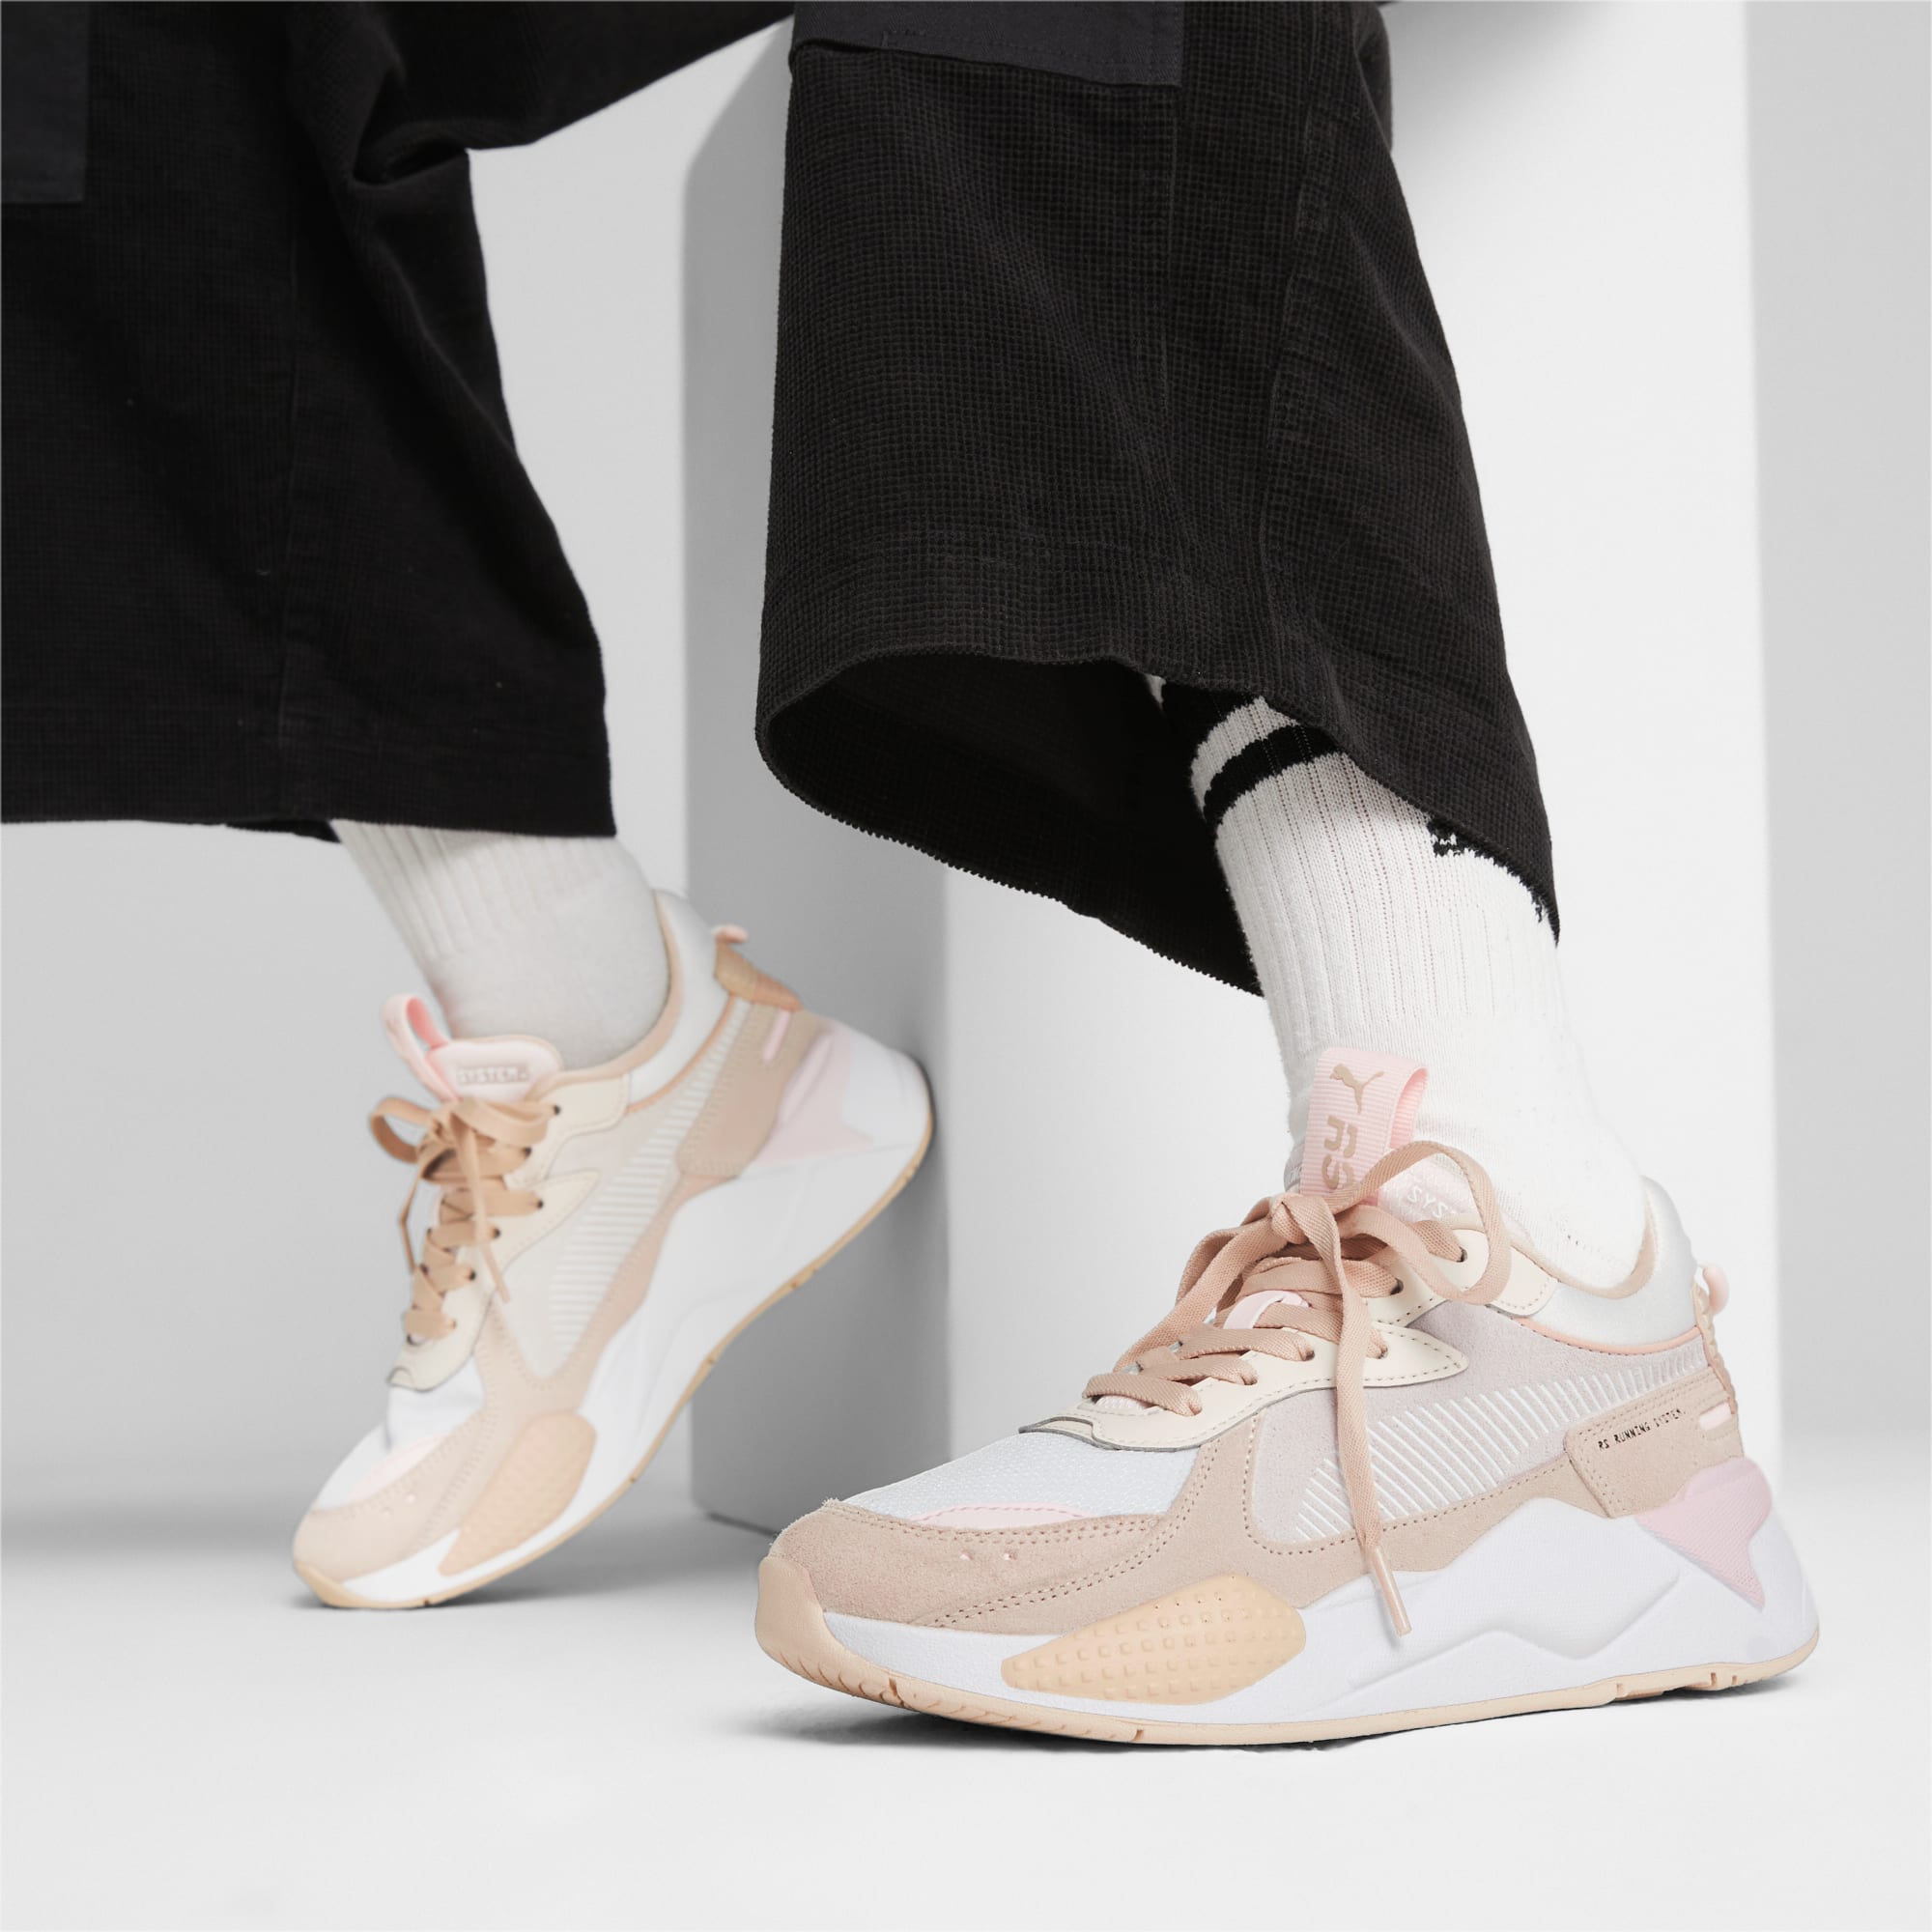 RS-X Reinvent Women's Sneakers | PUMA